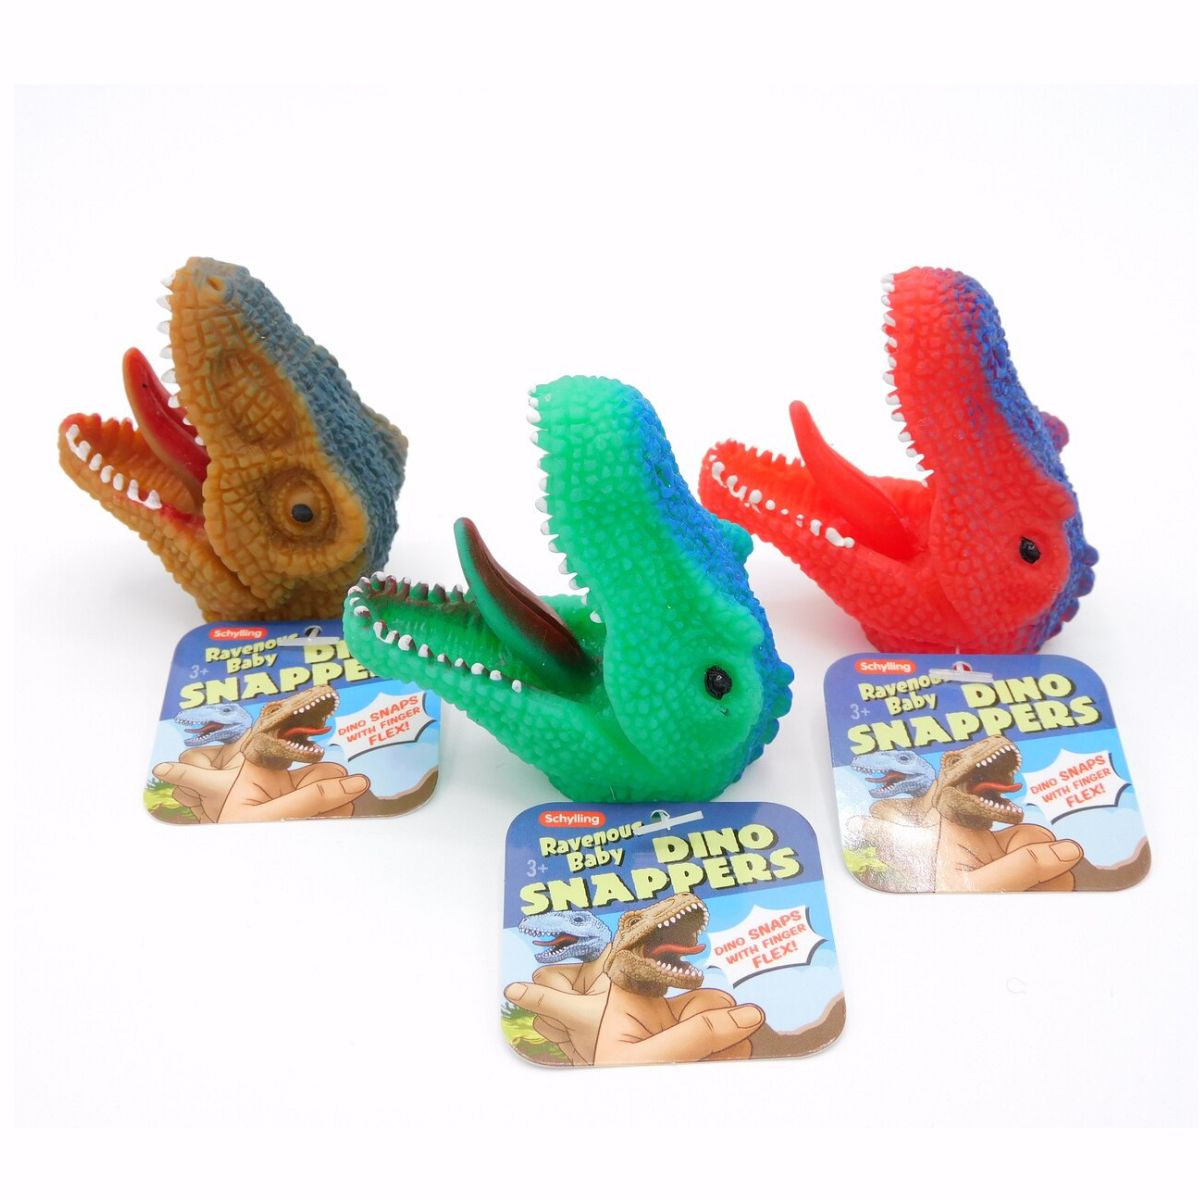 Baby Dino Snappers